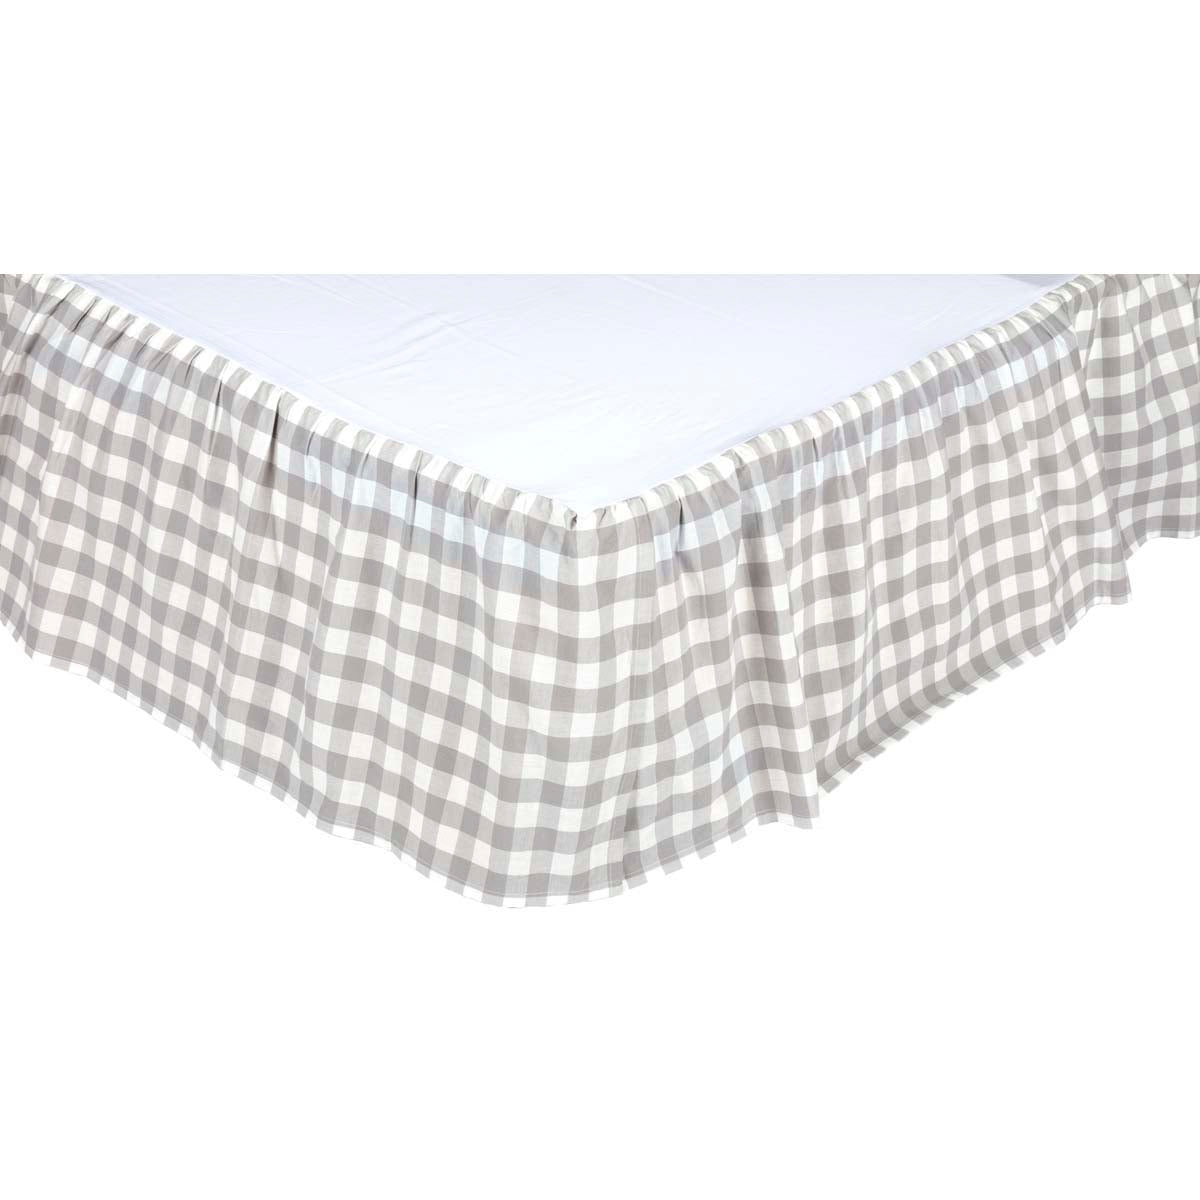 April & Olive Annie Buffalo Grey Check King Bed Skirt 78x80x16 By VHC Brands